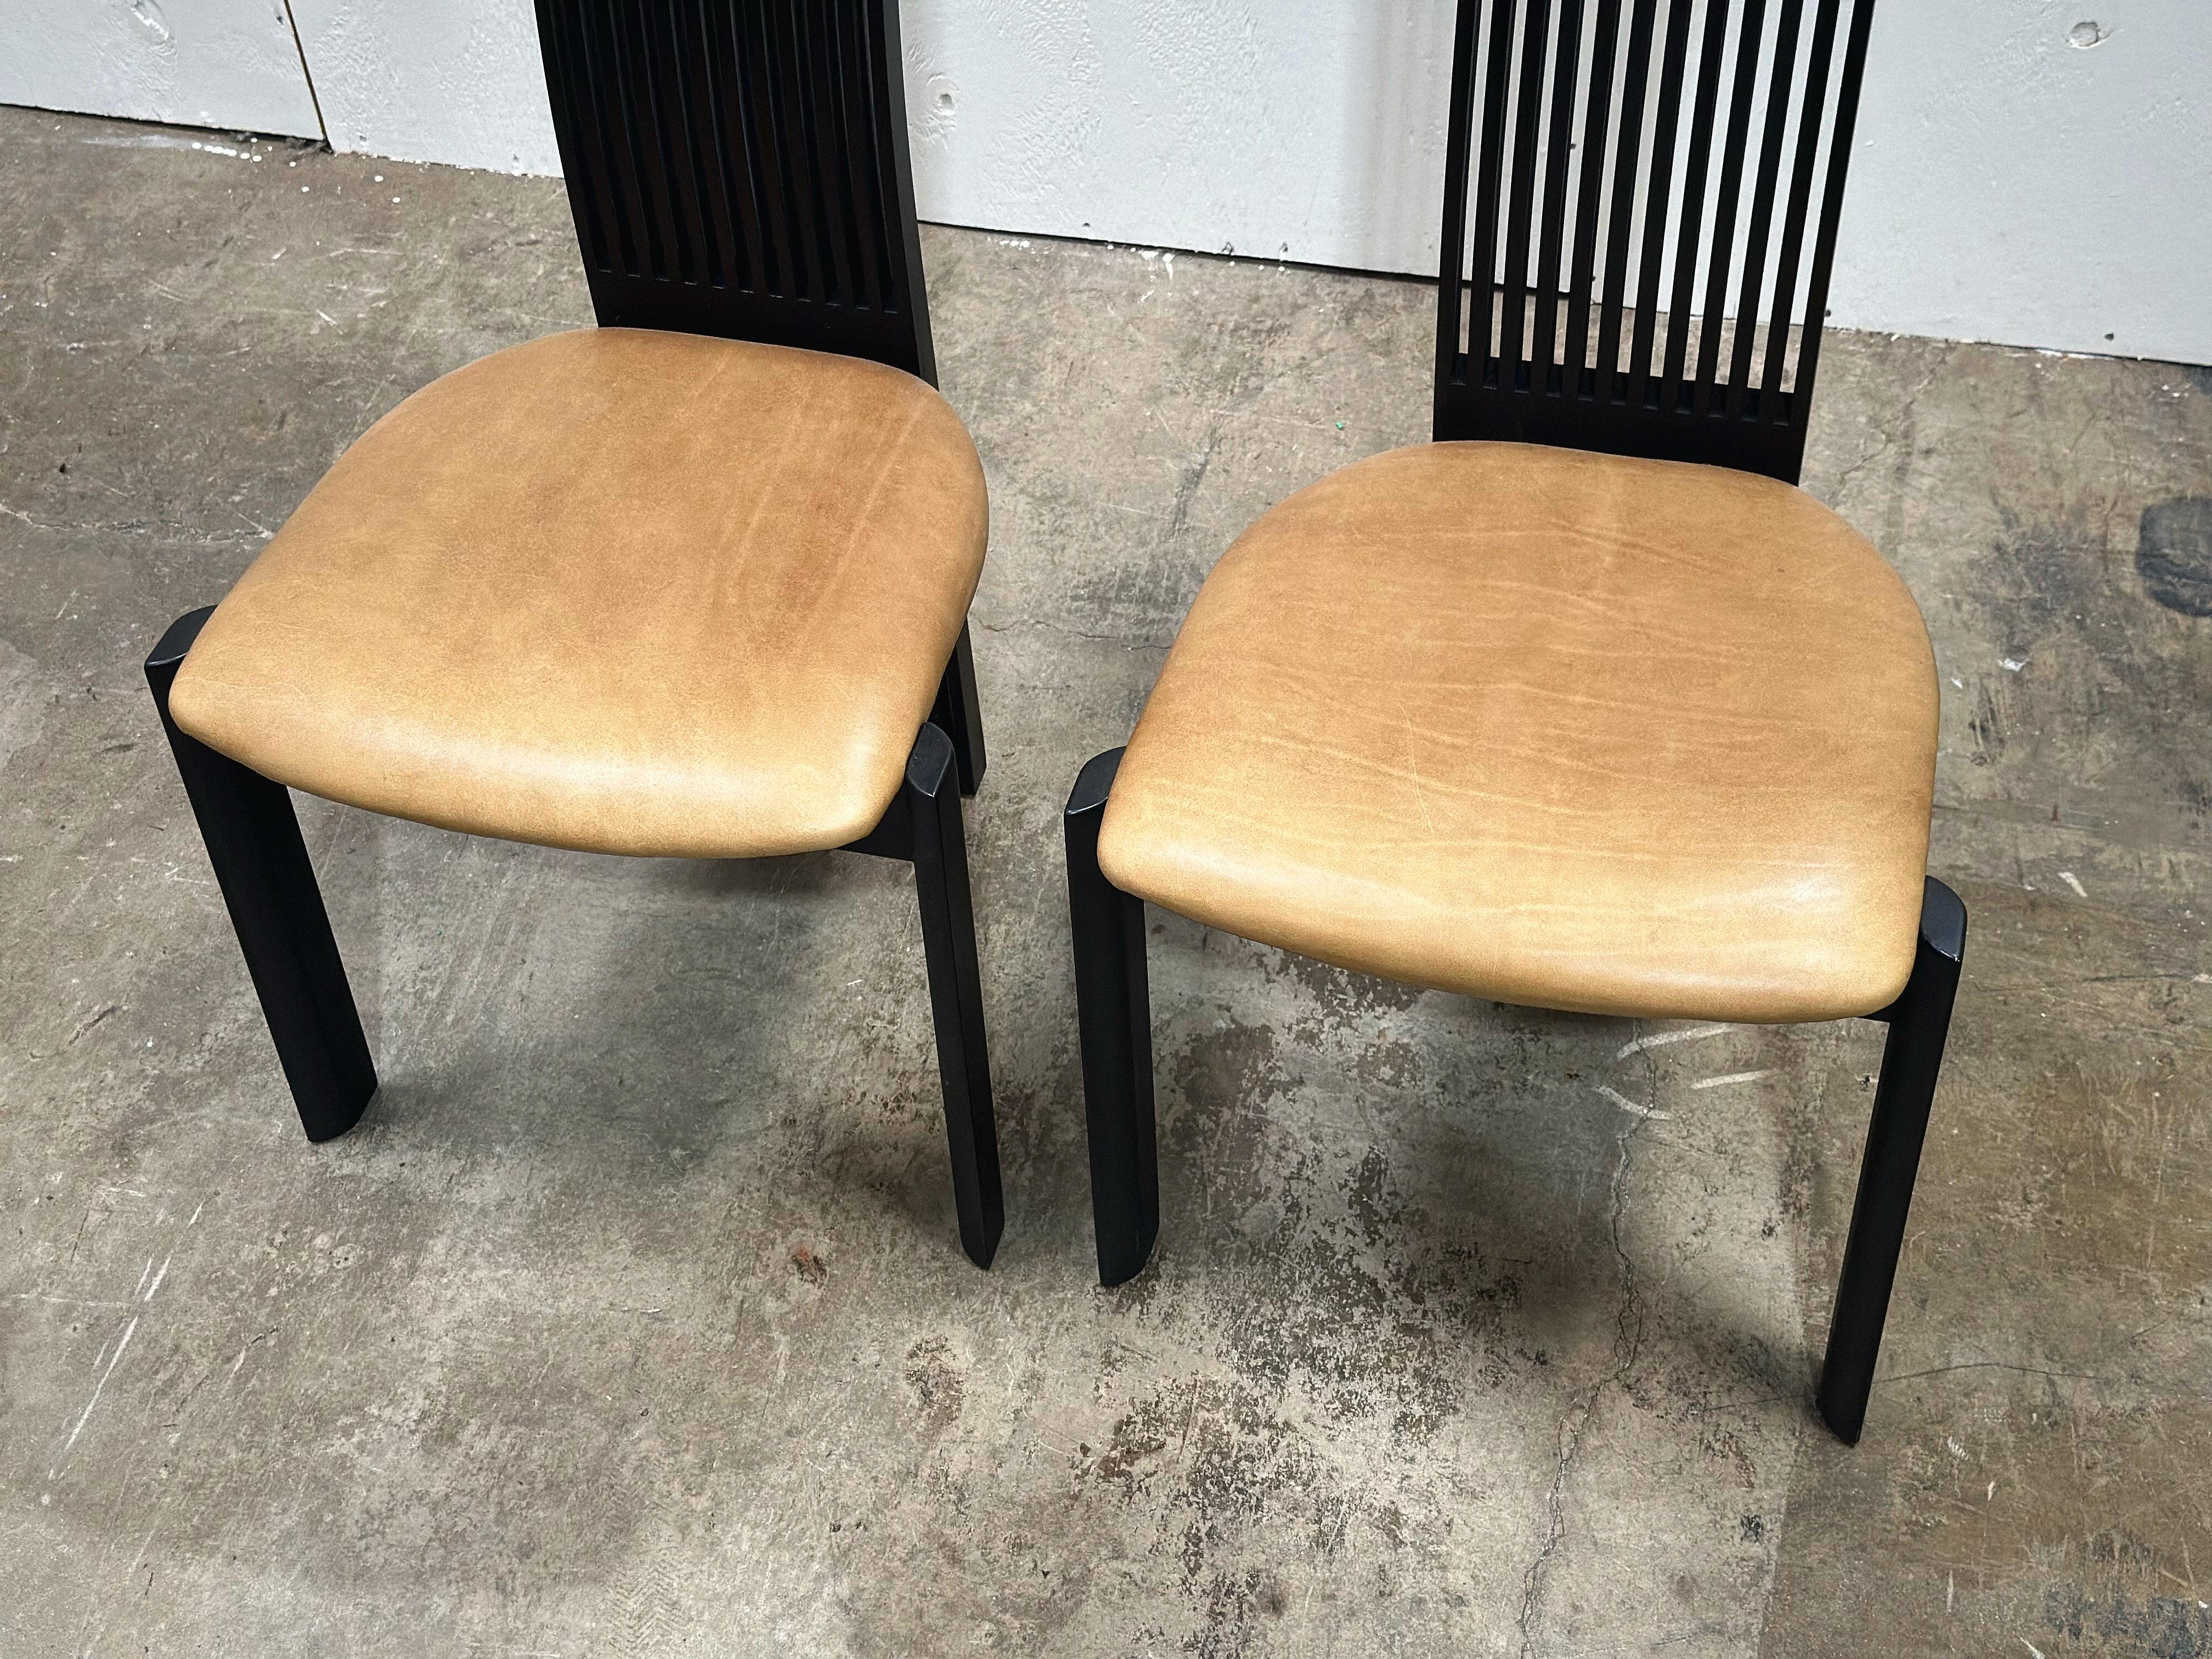 Post Modern High Back Leather Dining Chairs - Pietro Consantini - Set of 8 In Good Condition For Sale In Decatur, GA